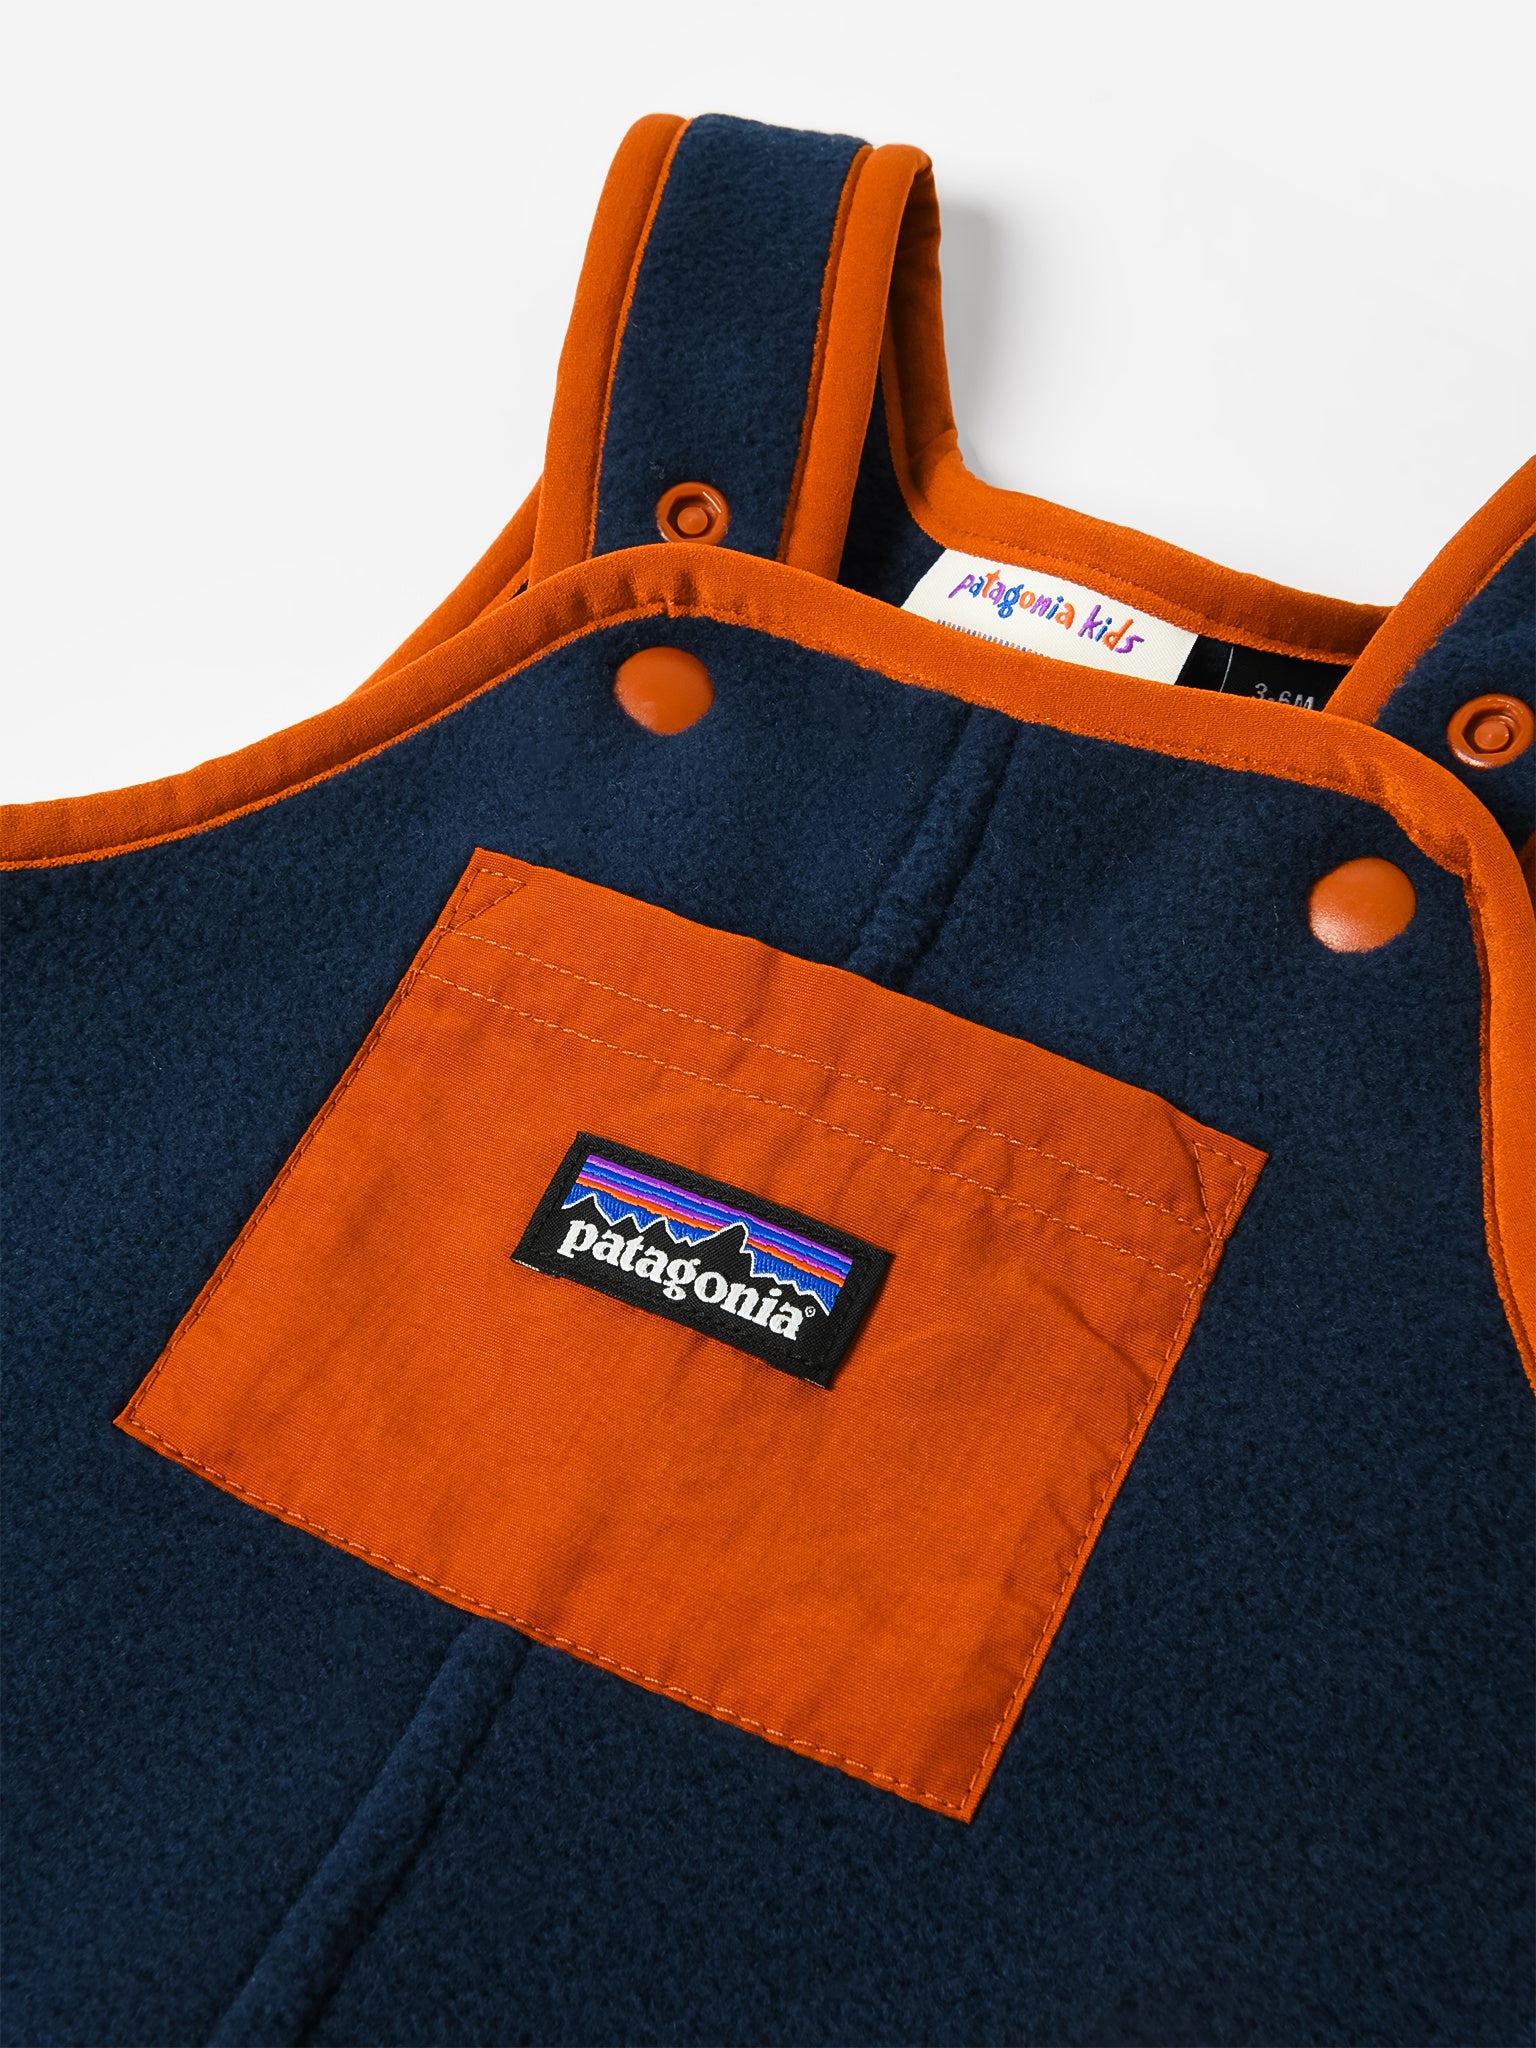 Patagonia Baby Synch Overalls